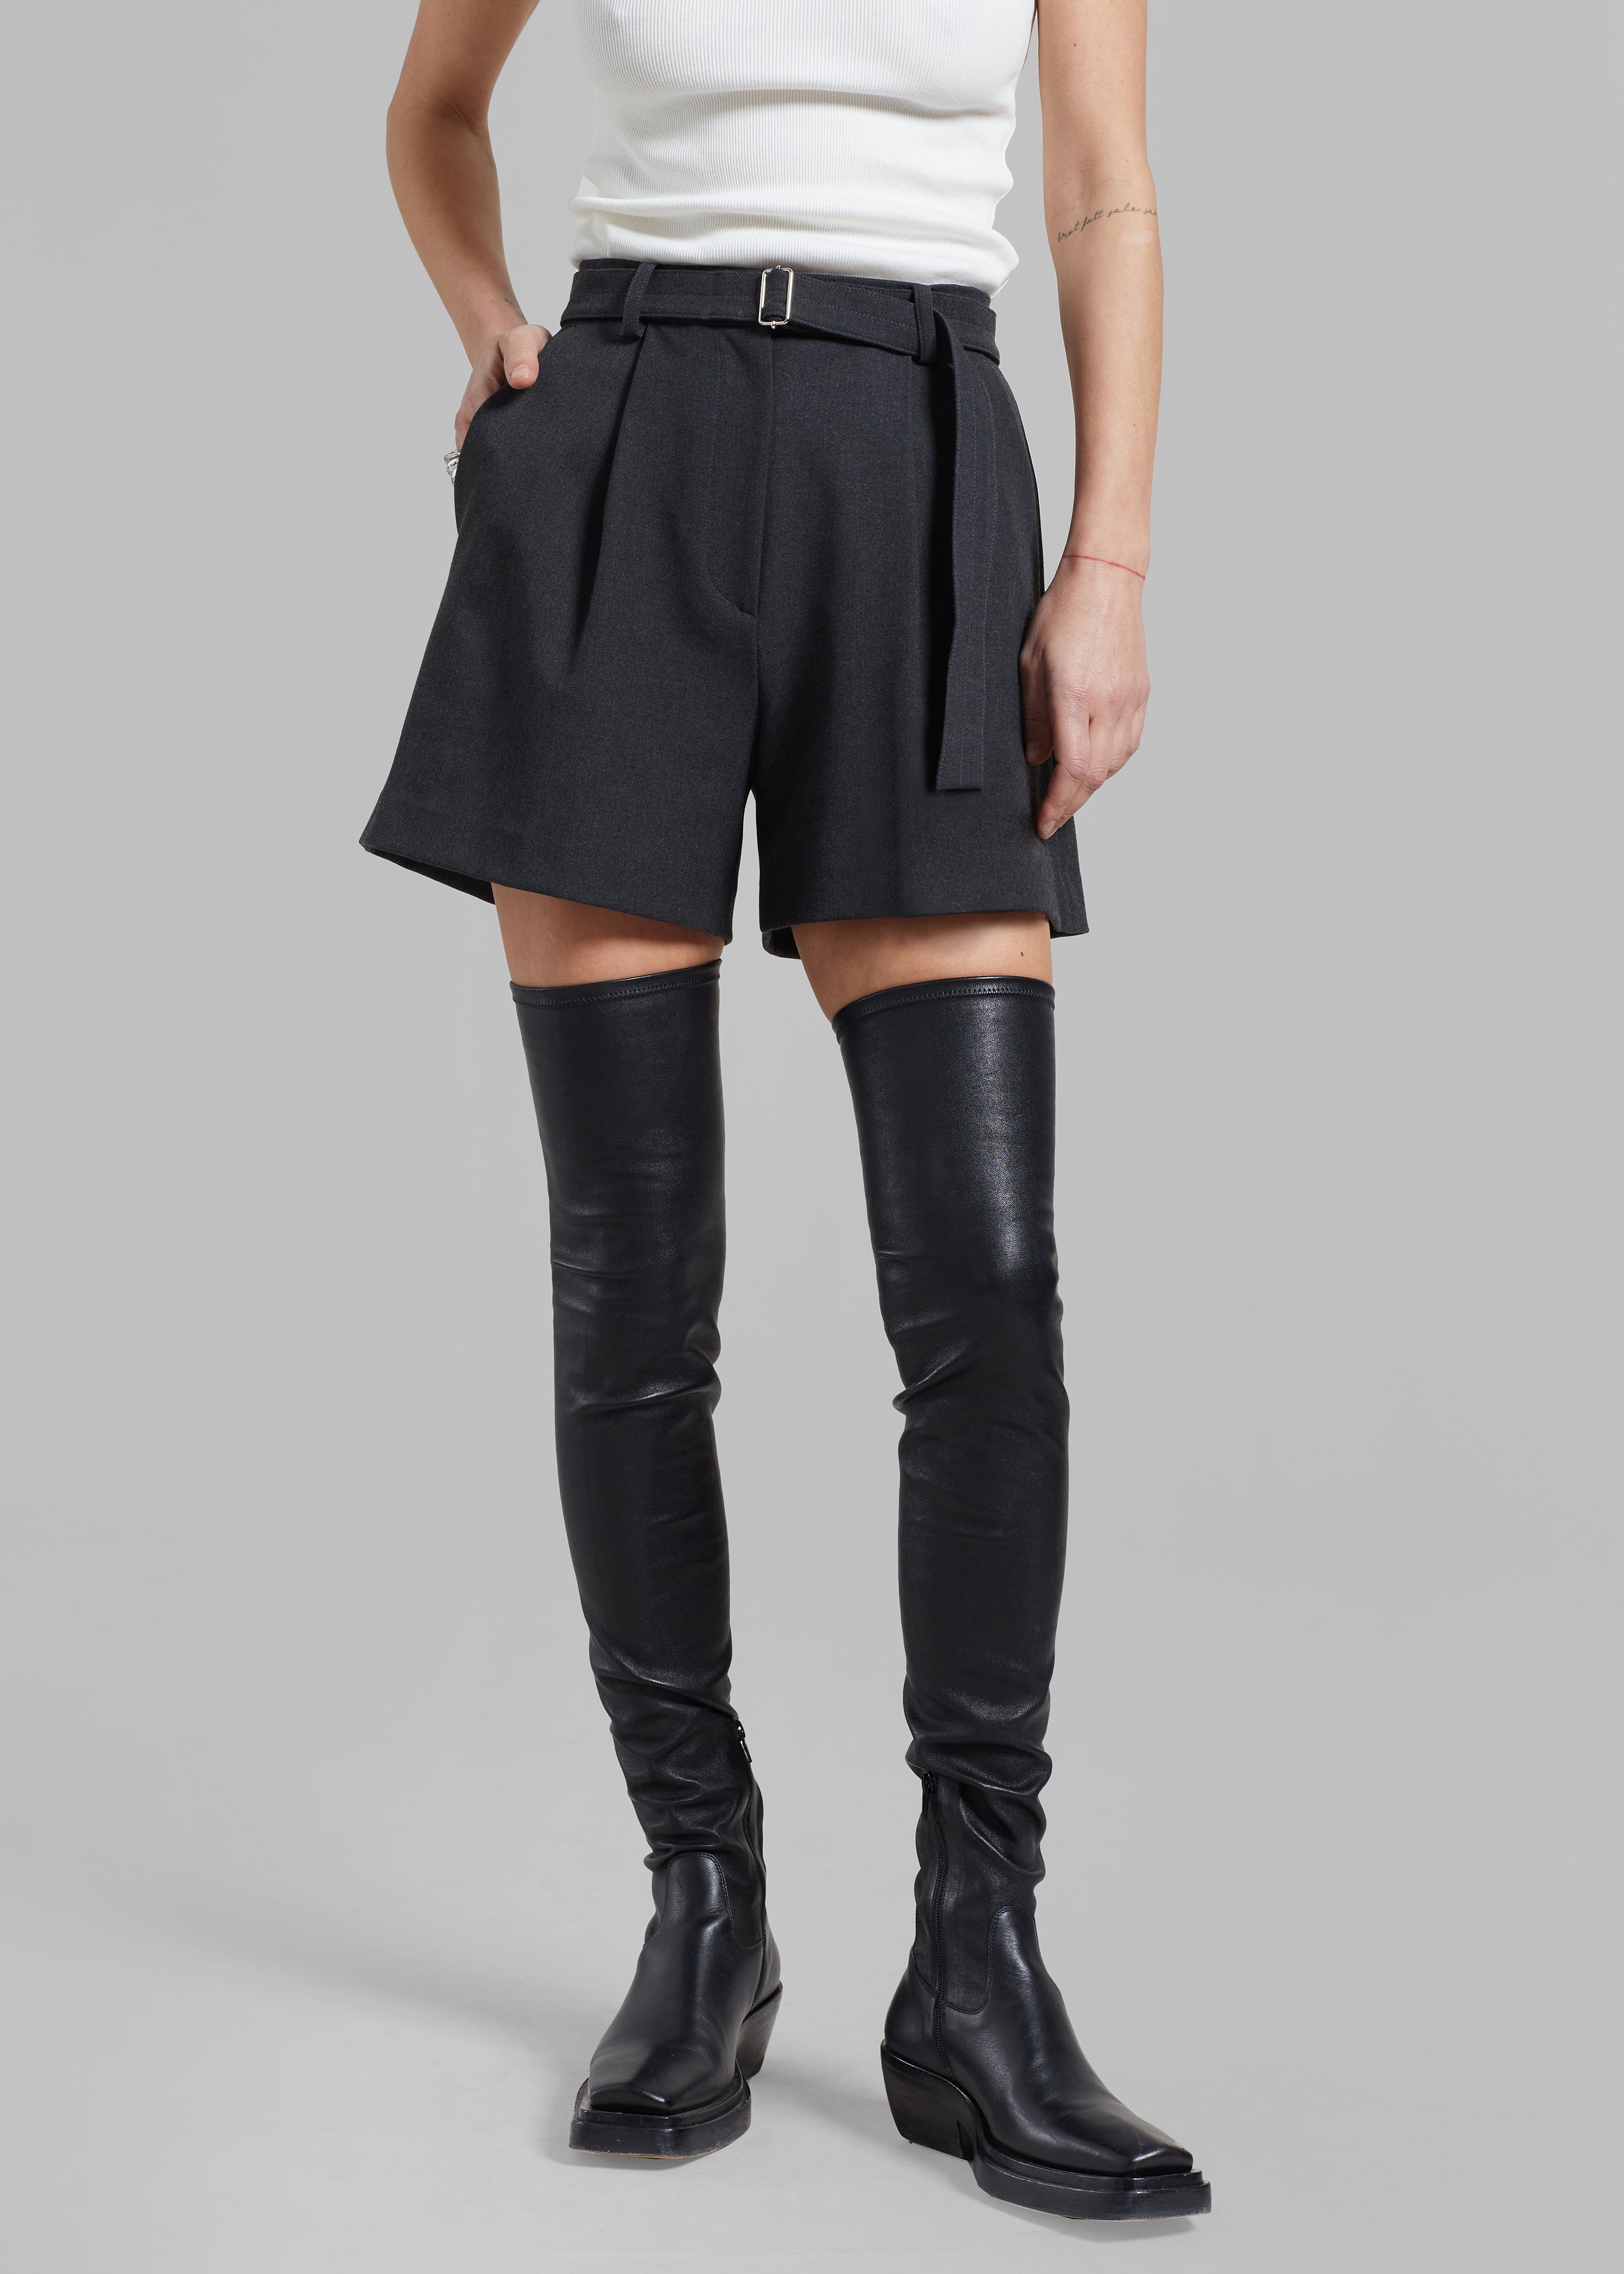 Avalon Belted Shorts - Charcoal - 2